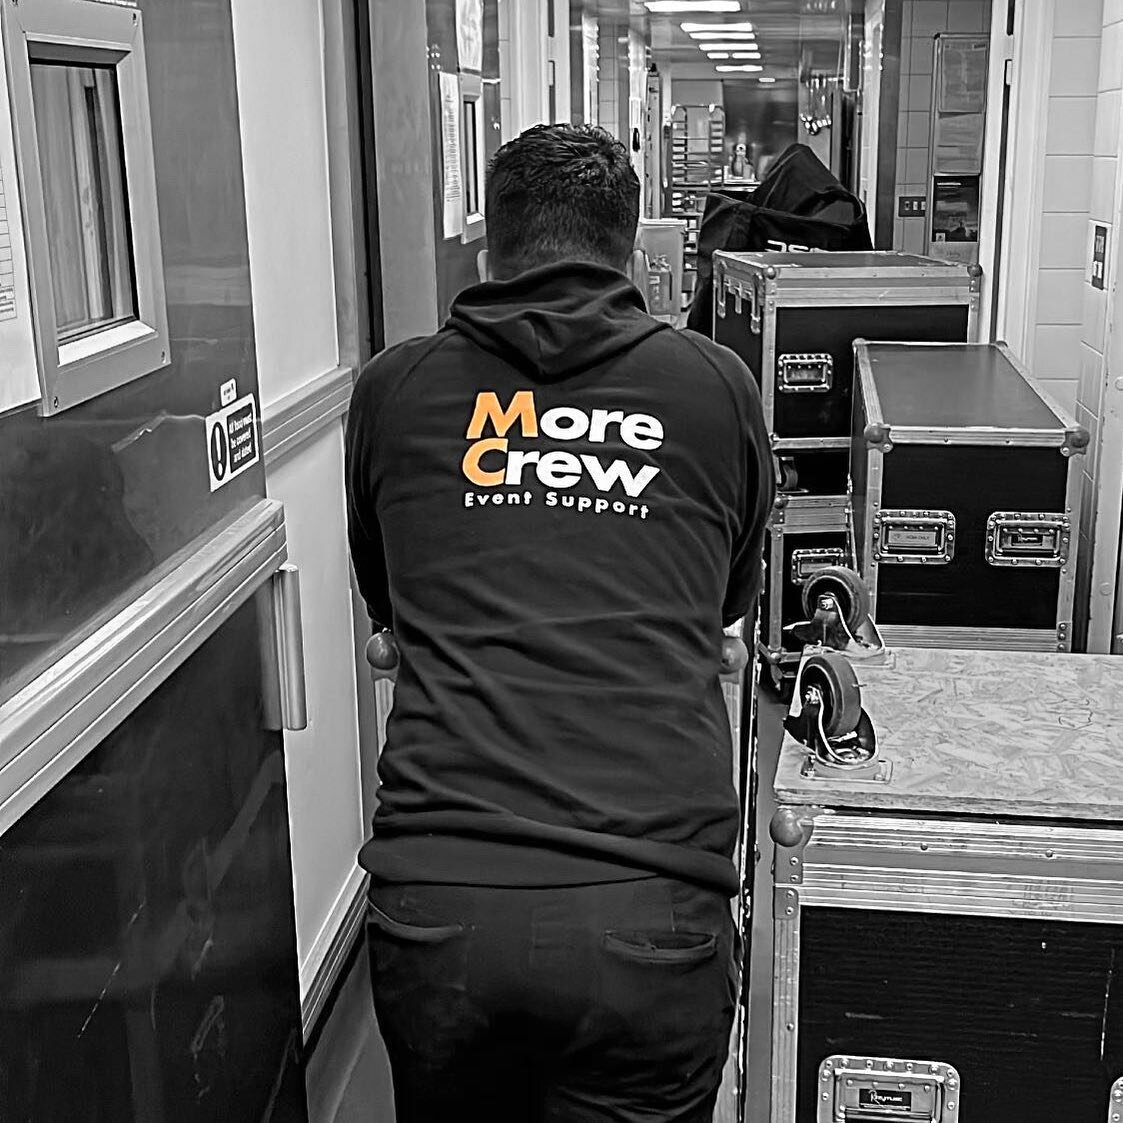 Rolling into the new week. Happy Monday!

Get in touch for enquiries:
📱: 0800 689 5489
✉️: info@morecrew.co.uk
💻: www.morecrew.co.uk

#morecrew #events #eventsupport #crew #eventslife #crewlife #sound #lighting #stage #videowall #ledwall #bespokeev